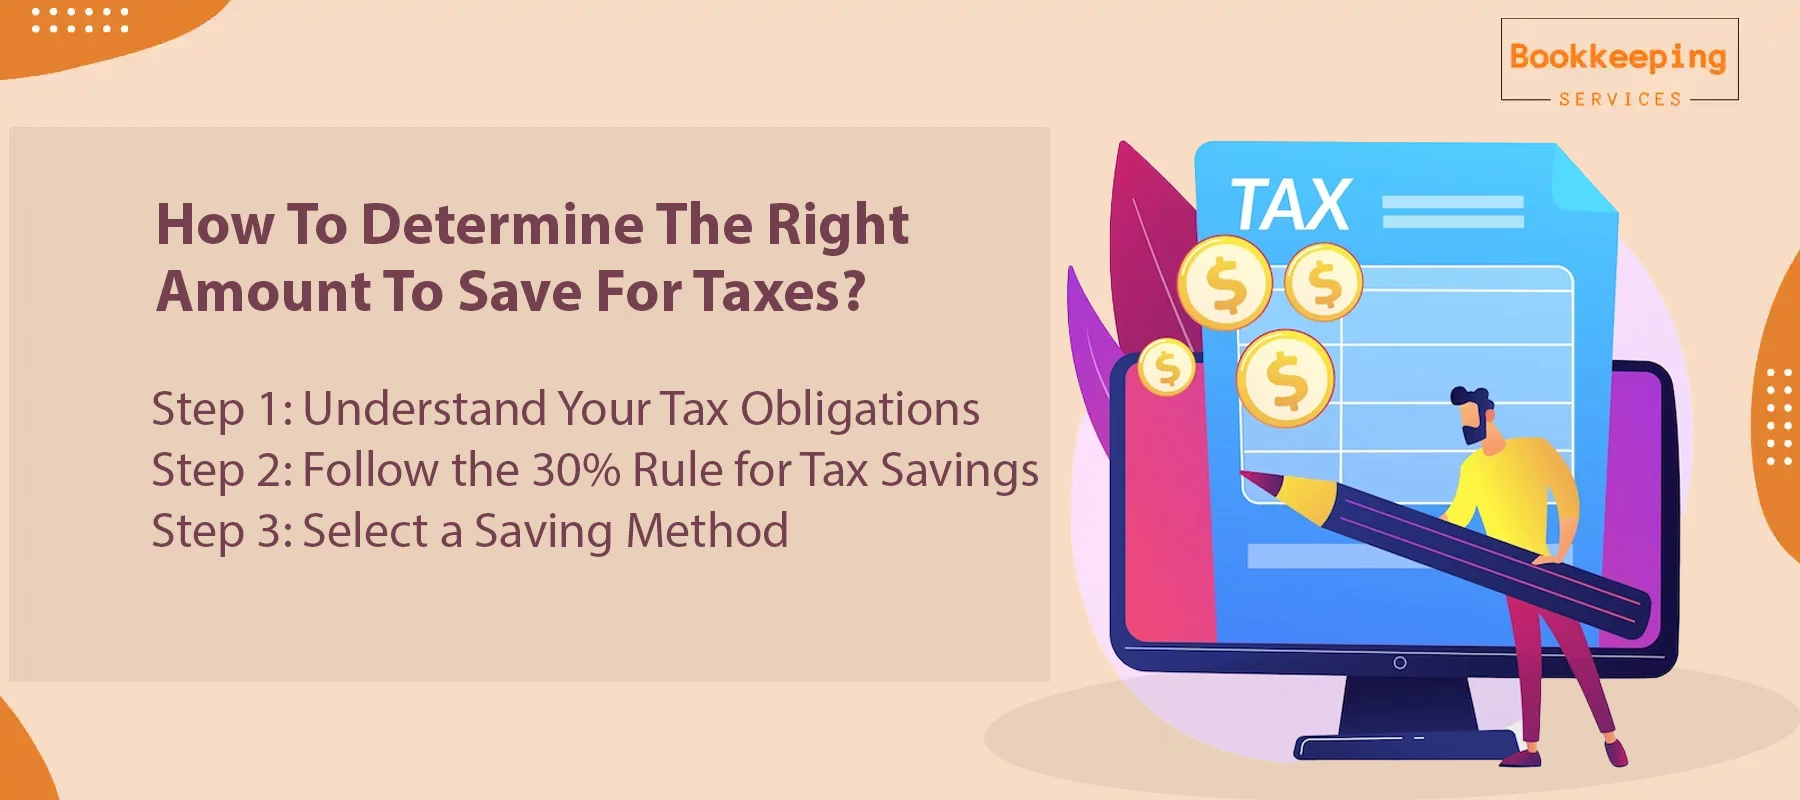 How to determine the right amount to save for taxes?